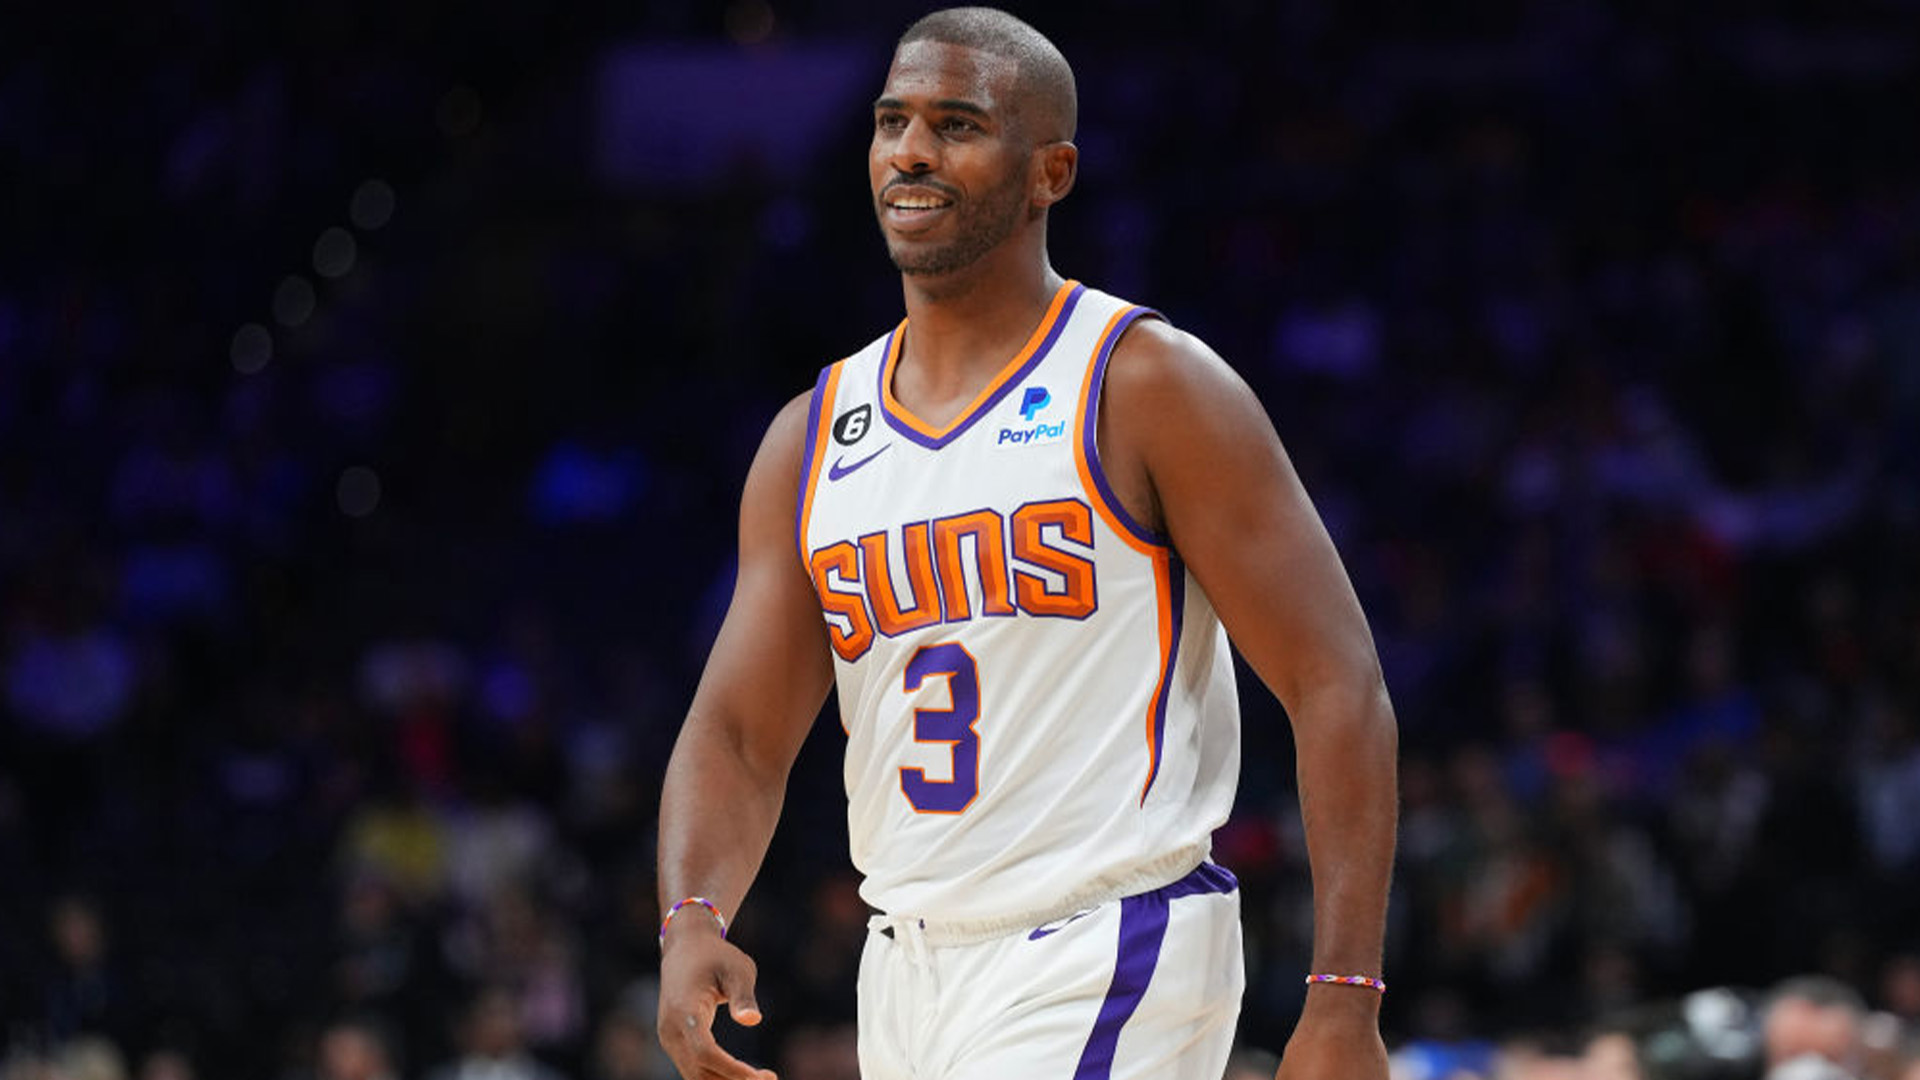 Chris Paul Graduates From HBCU Winston-Salem State Nearly 20 Years After Leaving Wake Forest For The NBA